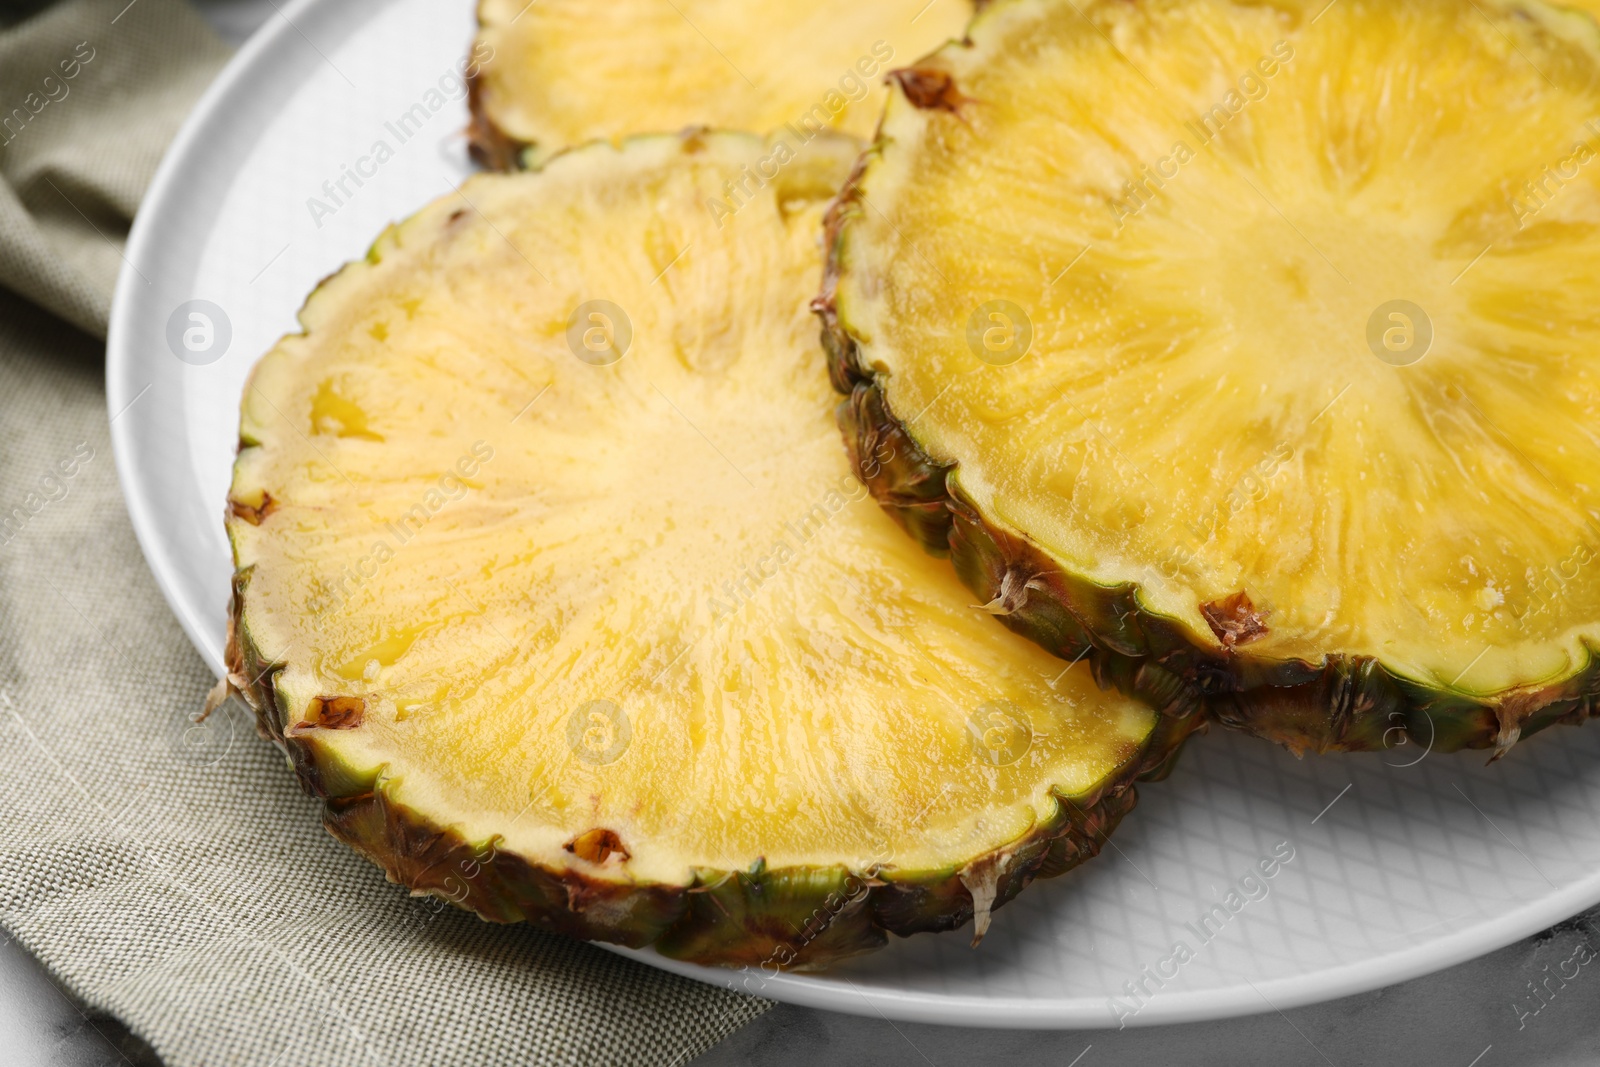 Photo of Slices of tasty ripe pineapple on table, closeup